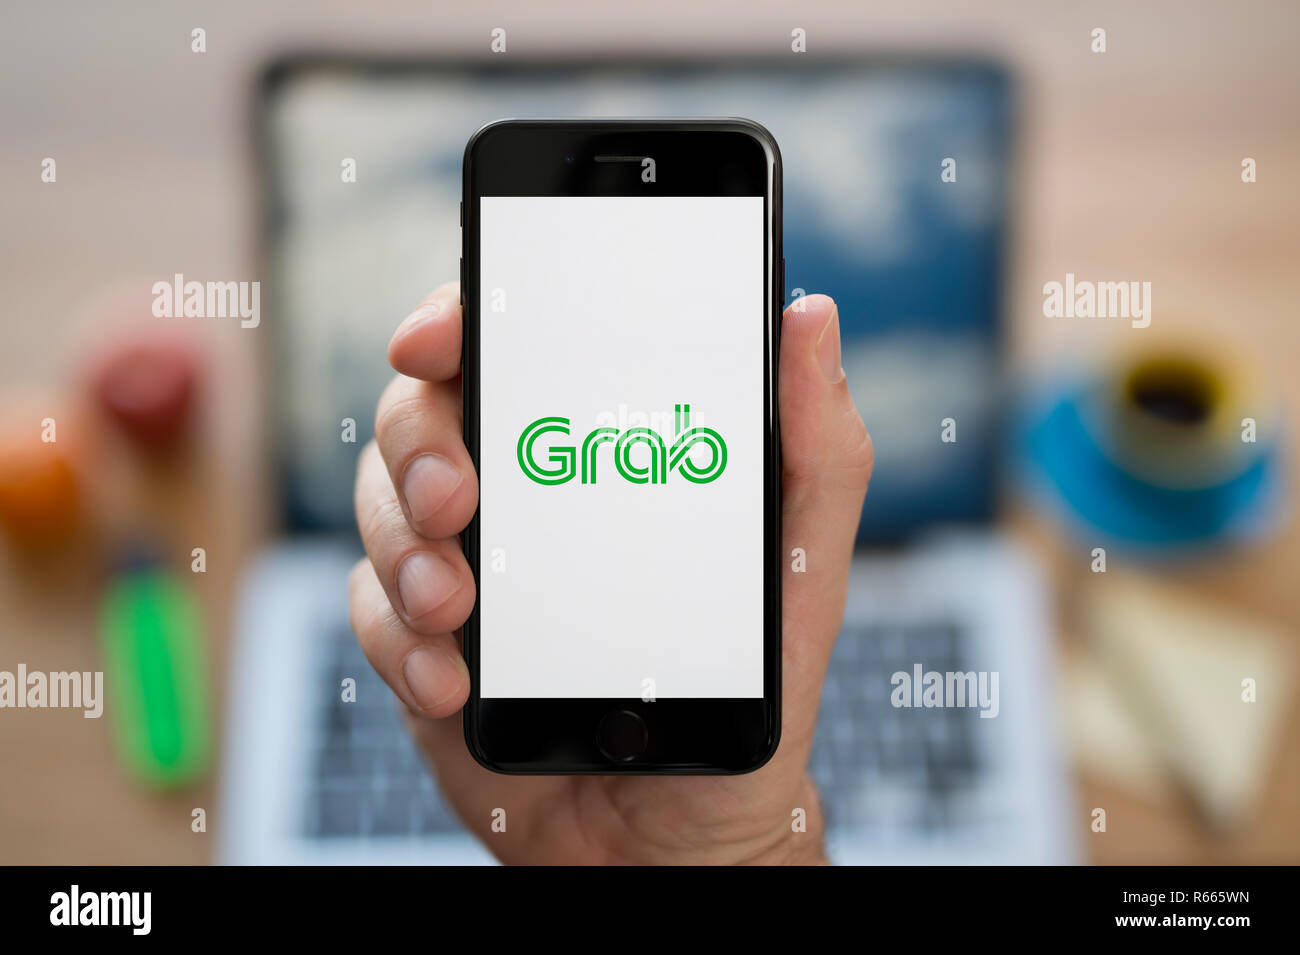 A man looks at his iPhone which displays the Grab logo, while sat at his computer desk (Editorial use only). Stock Photo